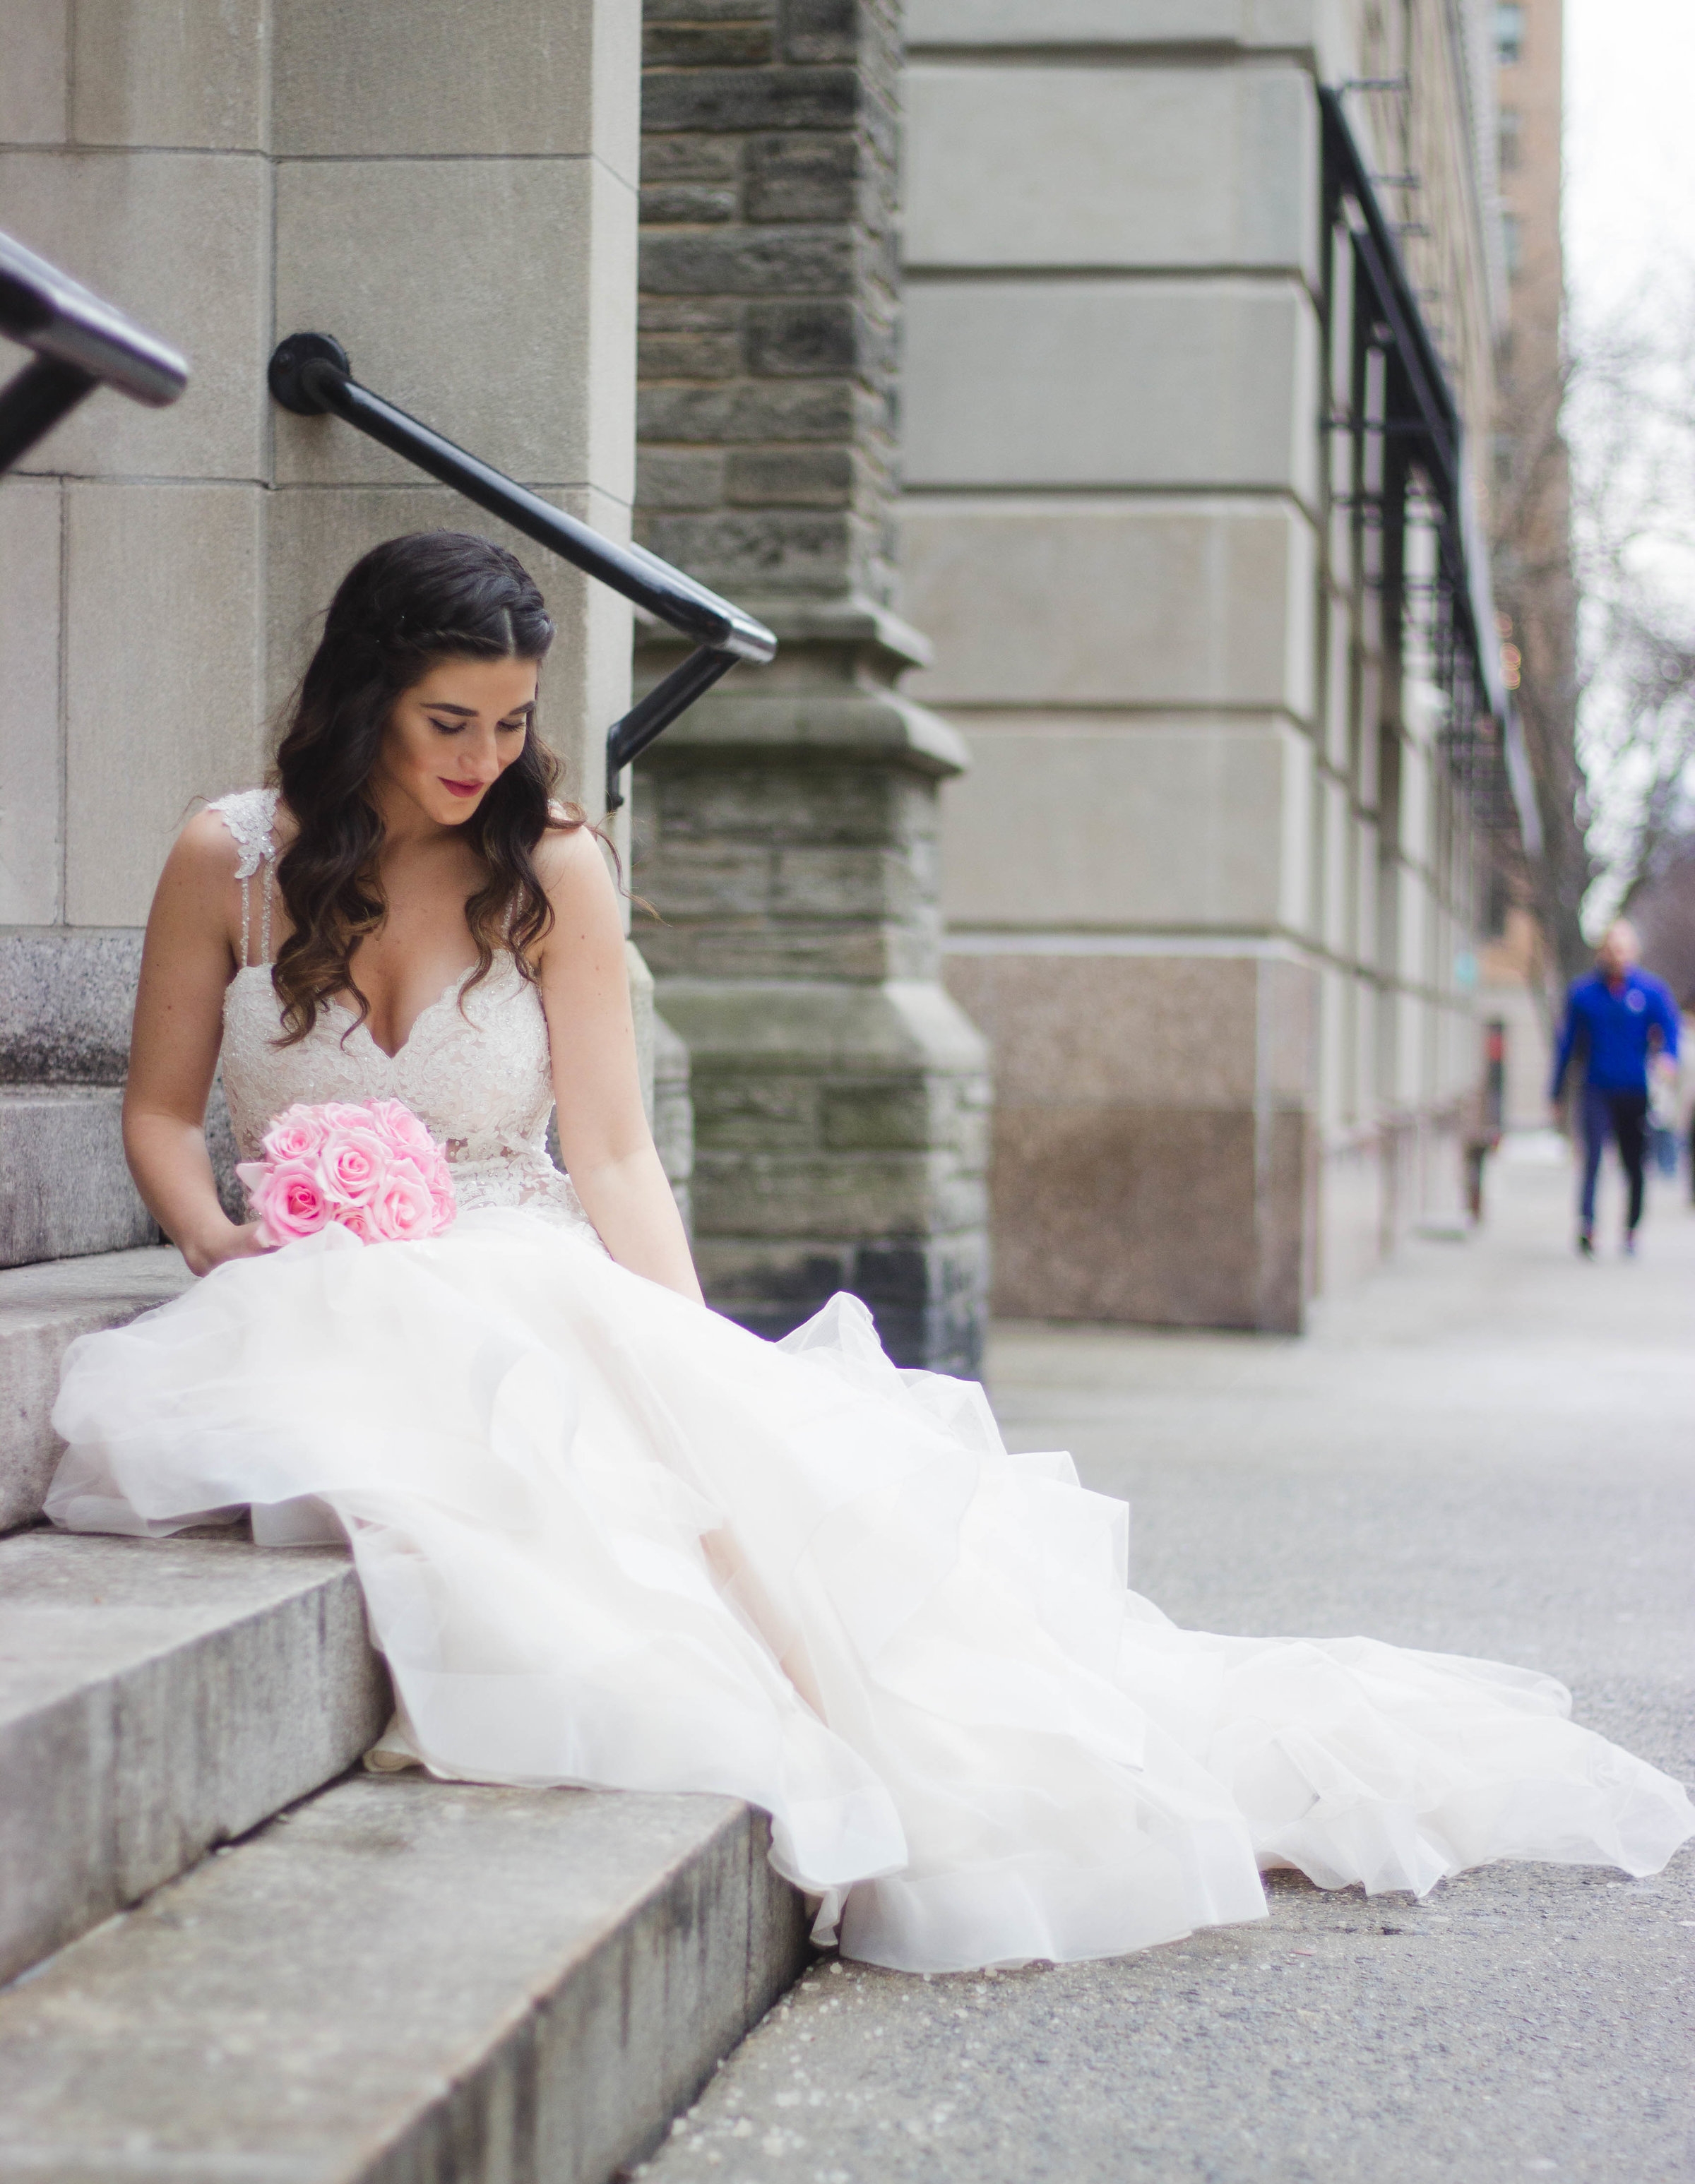 Playing Dress Up With Morilee Bridal Esther Santer Fashion Blog NYC Street Style Blogger Outfit OOTD Trendy Wedding Dress Gown White Dreamy Modern Timeless Beautiful Train Pink Flowers Bouquet Hair Hairstyle Beauty Makeup Lace Trumpet Mermaid Flare.jpg